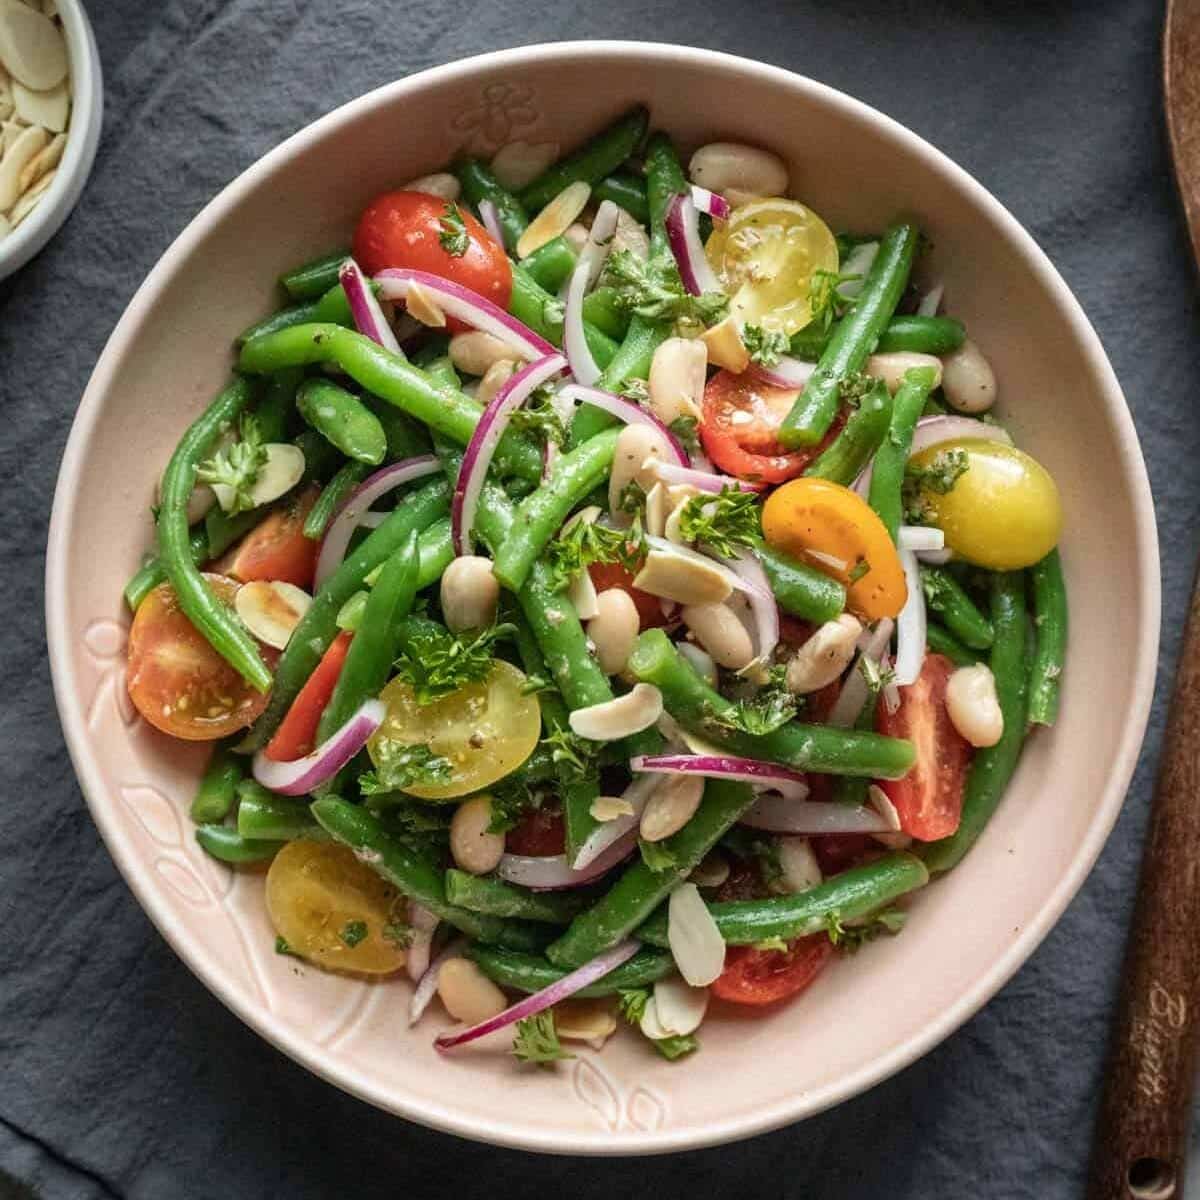 Bowl of salad with green beans, onion, tomatoes, and cannellini beans.